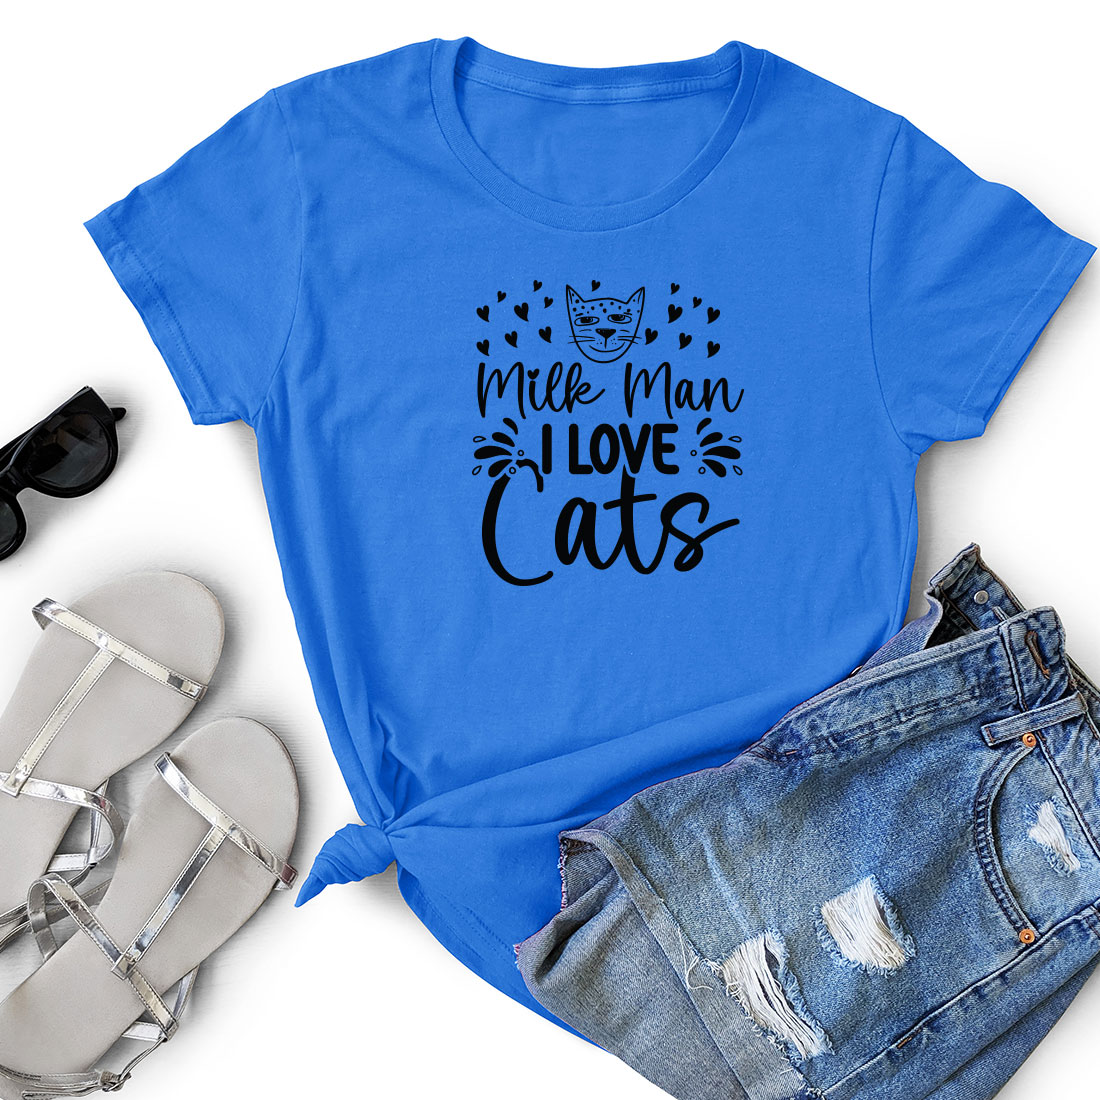 T - shirt with a cat on it and a pair of shorts.